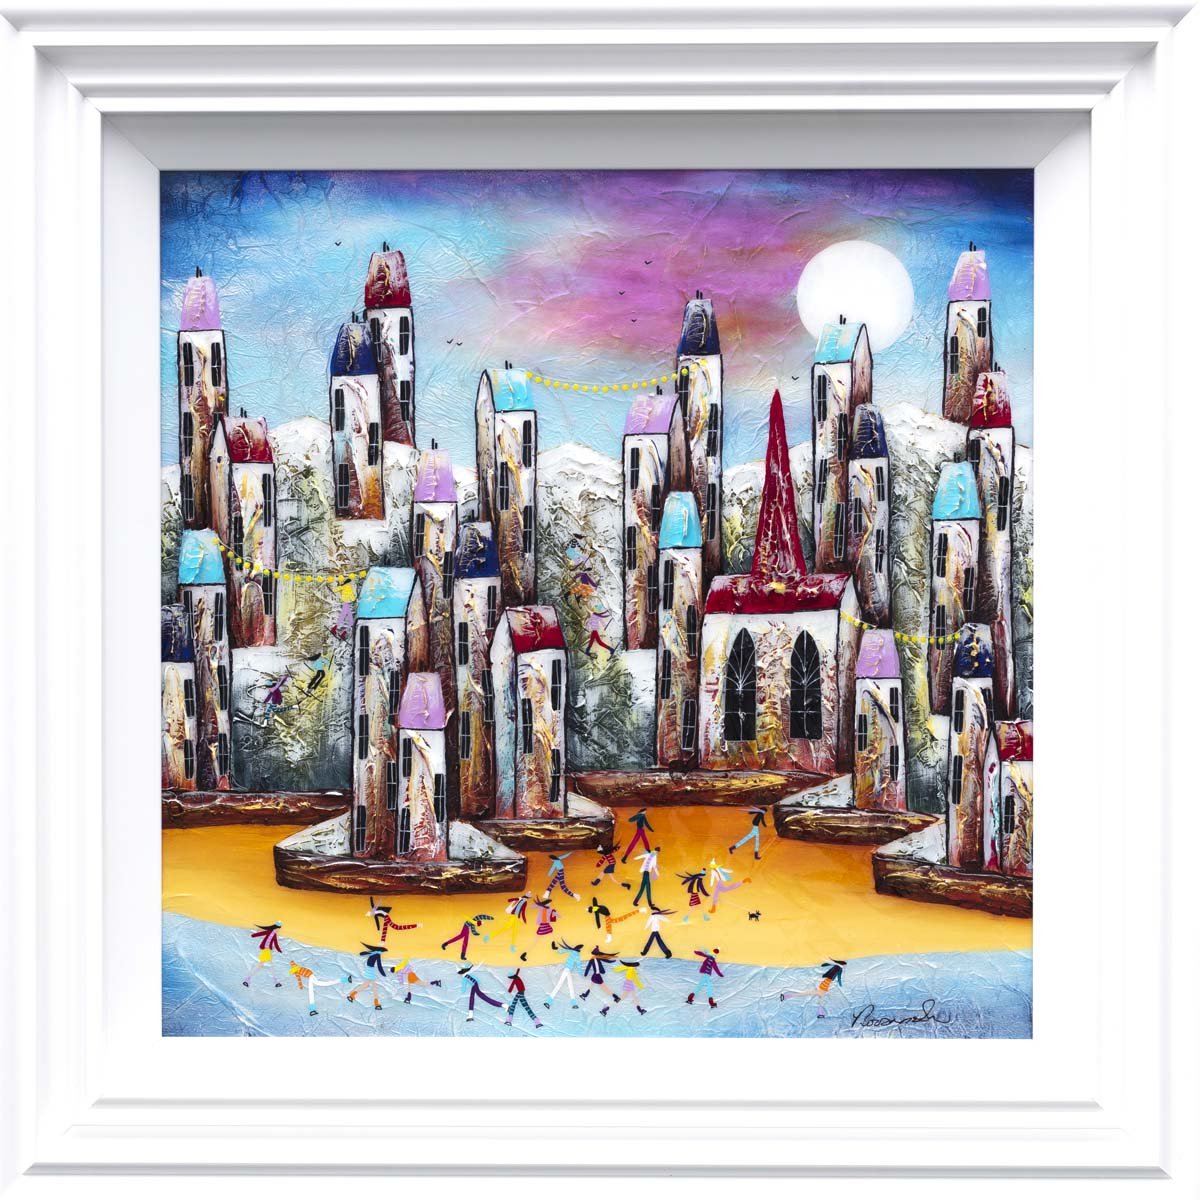 A Full Moon Party - Original Rozanne Bell Framed